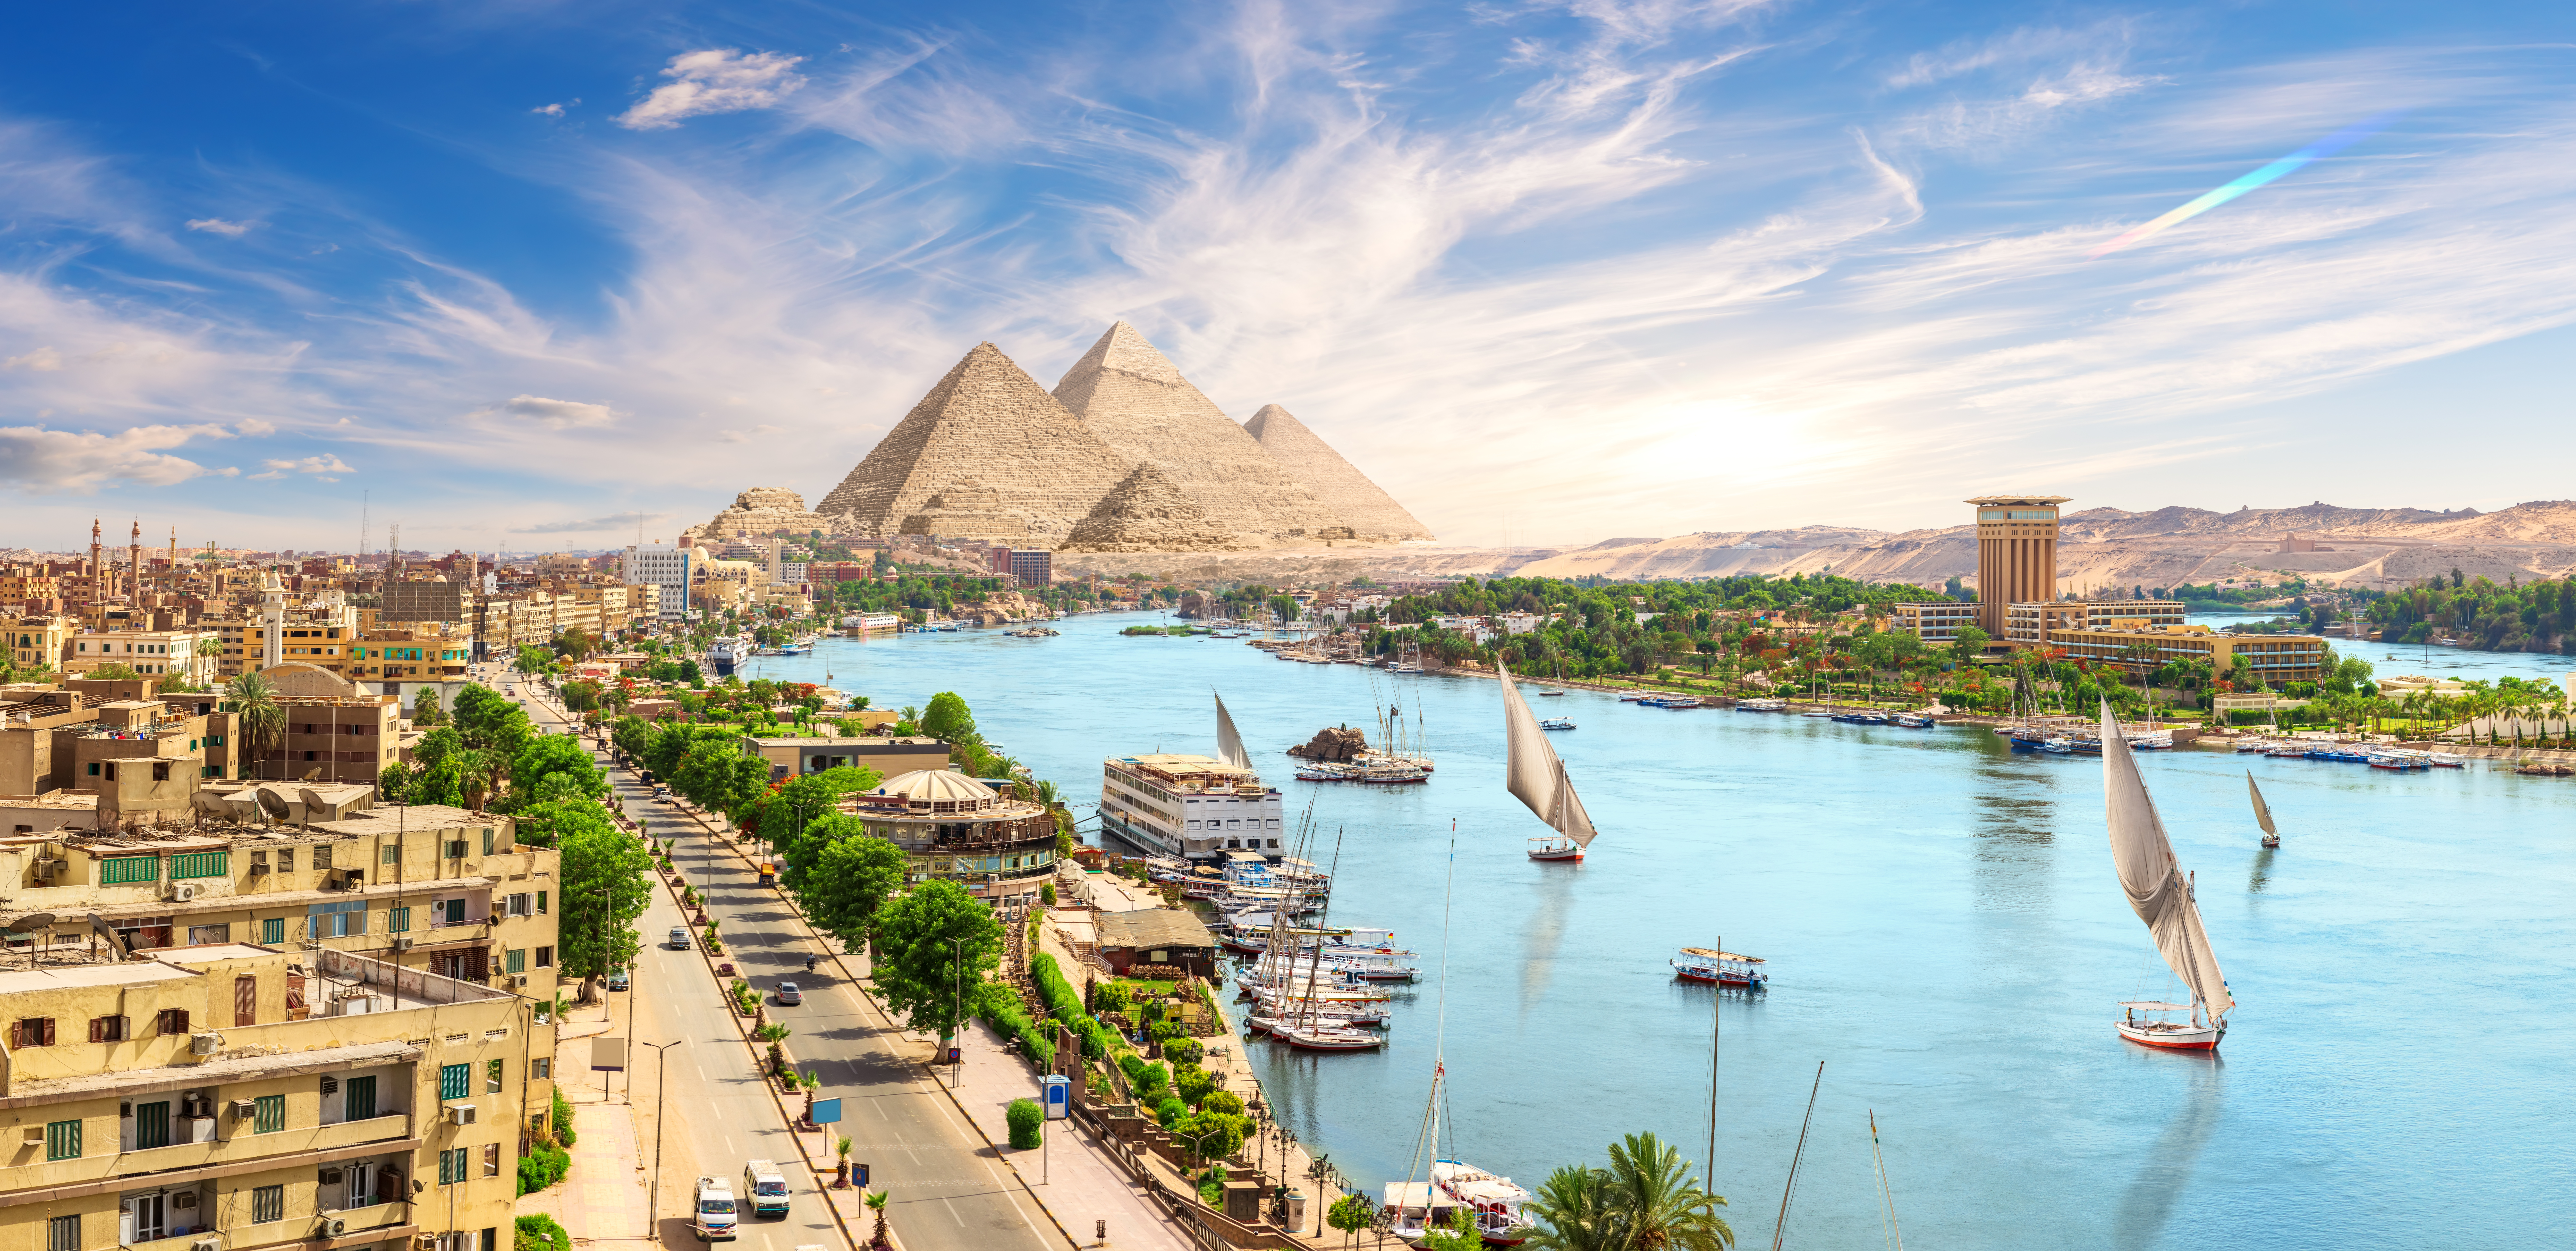 Aswan downtown with sailboats, panoramic view on the Nile, Egypt